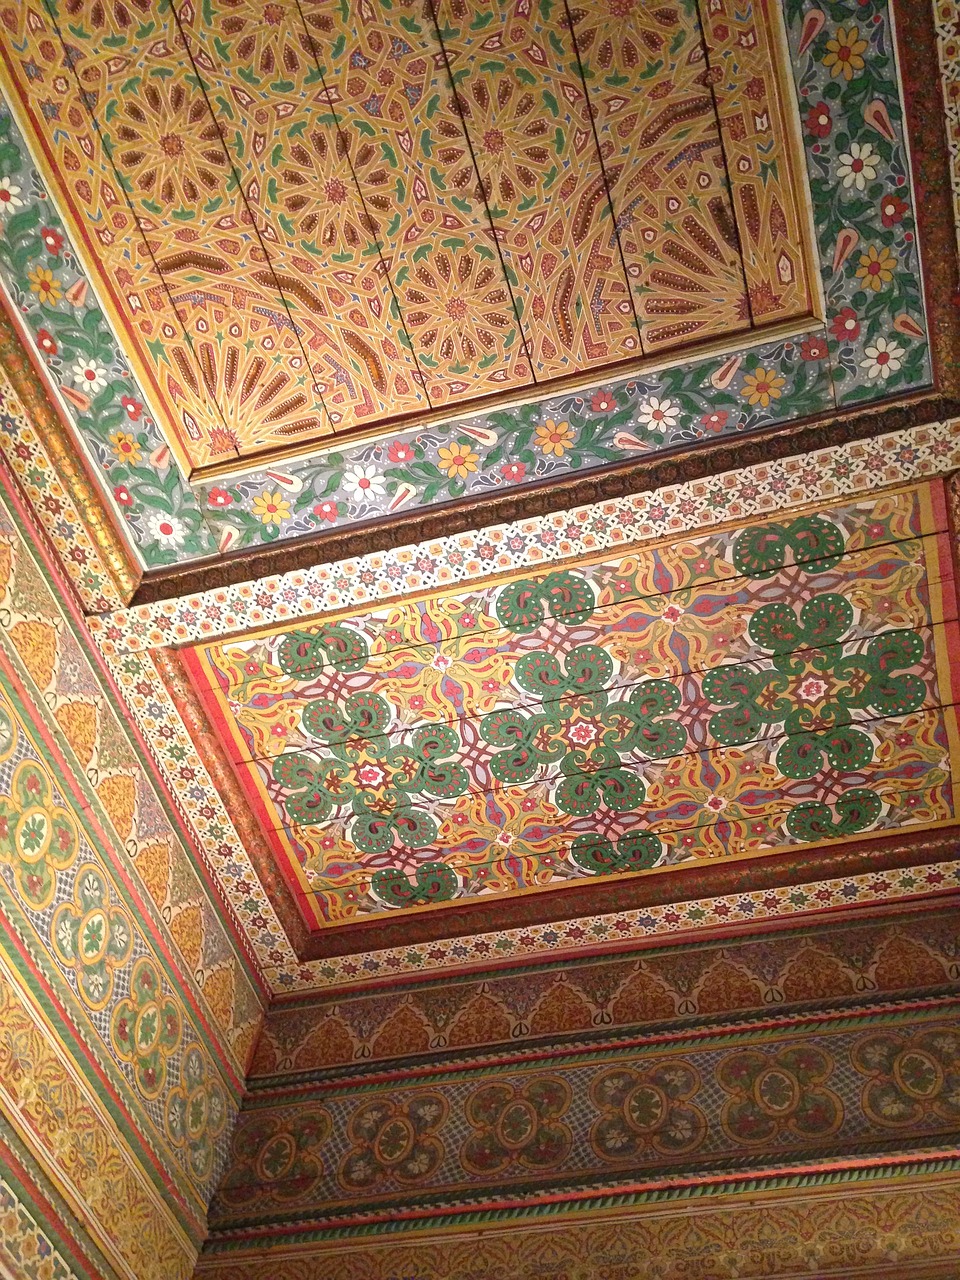 morocco tiles ceiling free photo